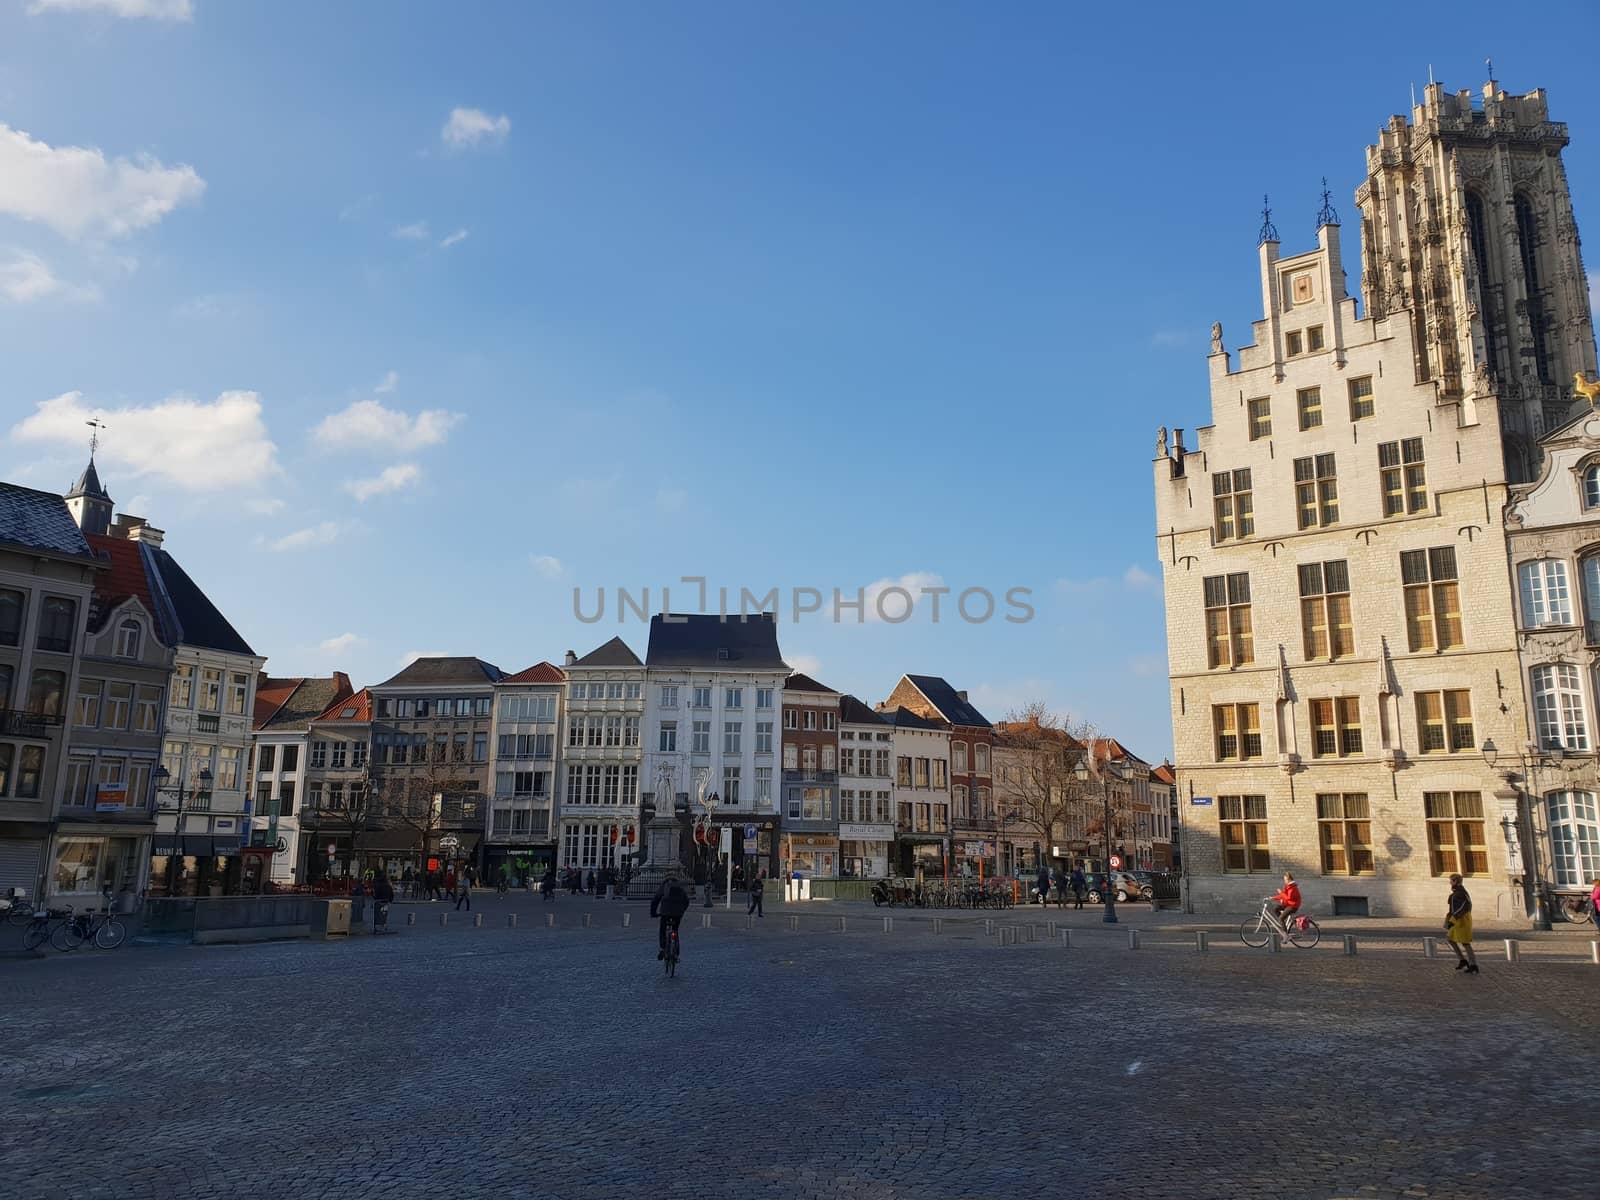 Mechelen, Flanders, Belgium - December 13, 2018: The Mechelen square and the St. Rumbold's Cathedra in the historical city center in Mechelen (Malines) by matteobartolini